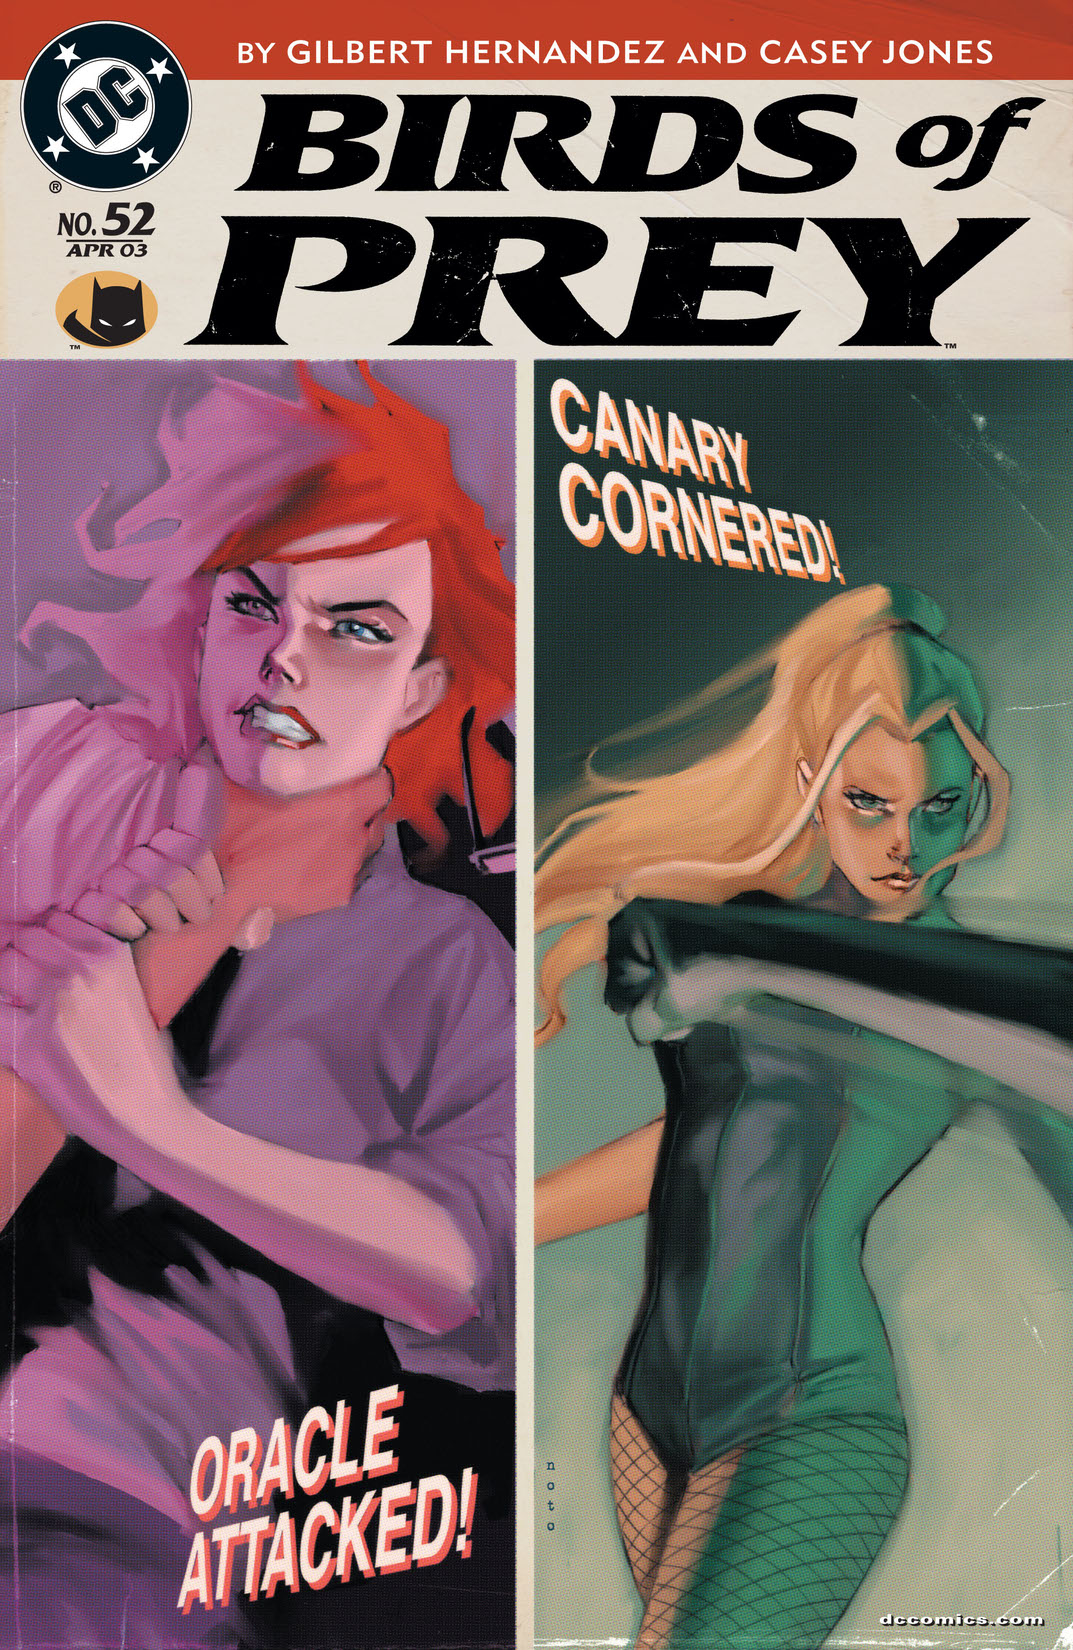 Birds of Prey (1998-) #52 preview images